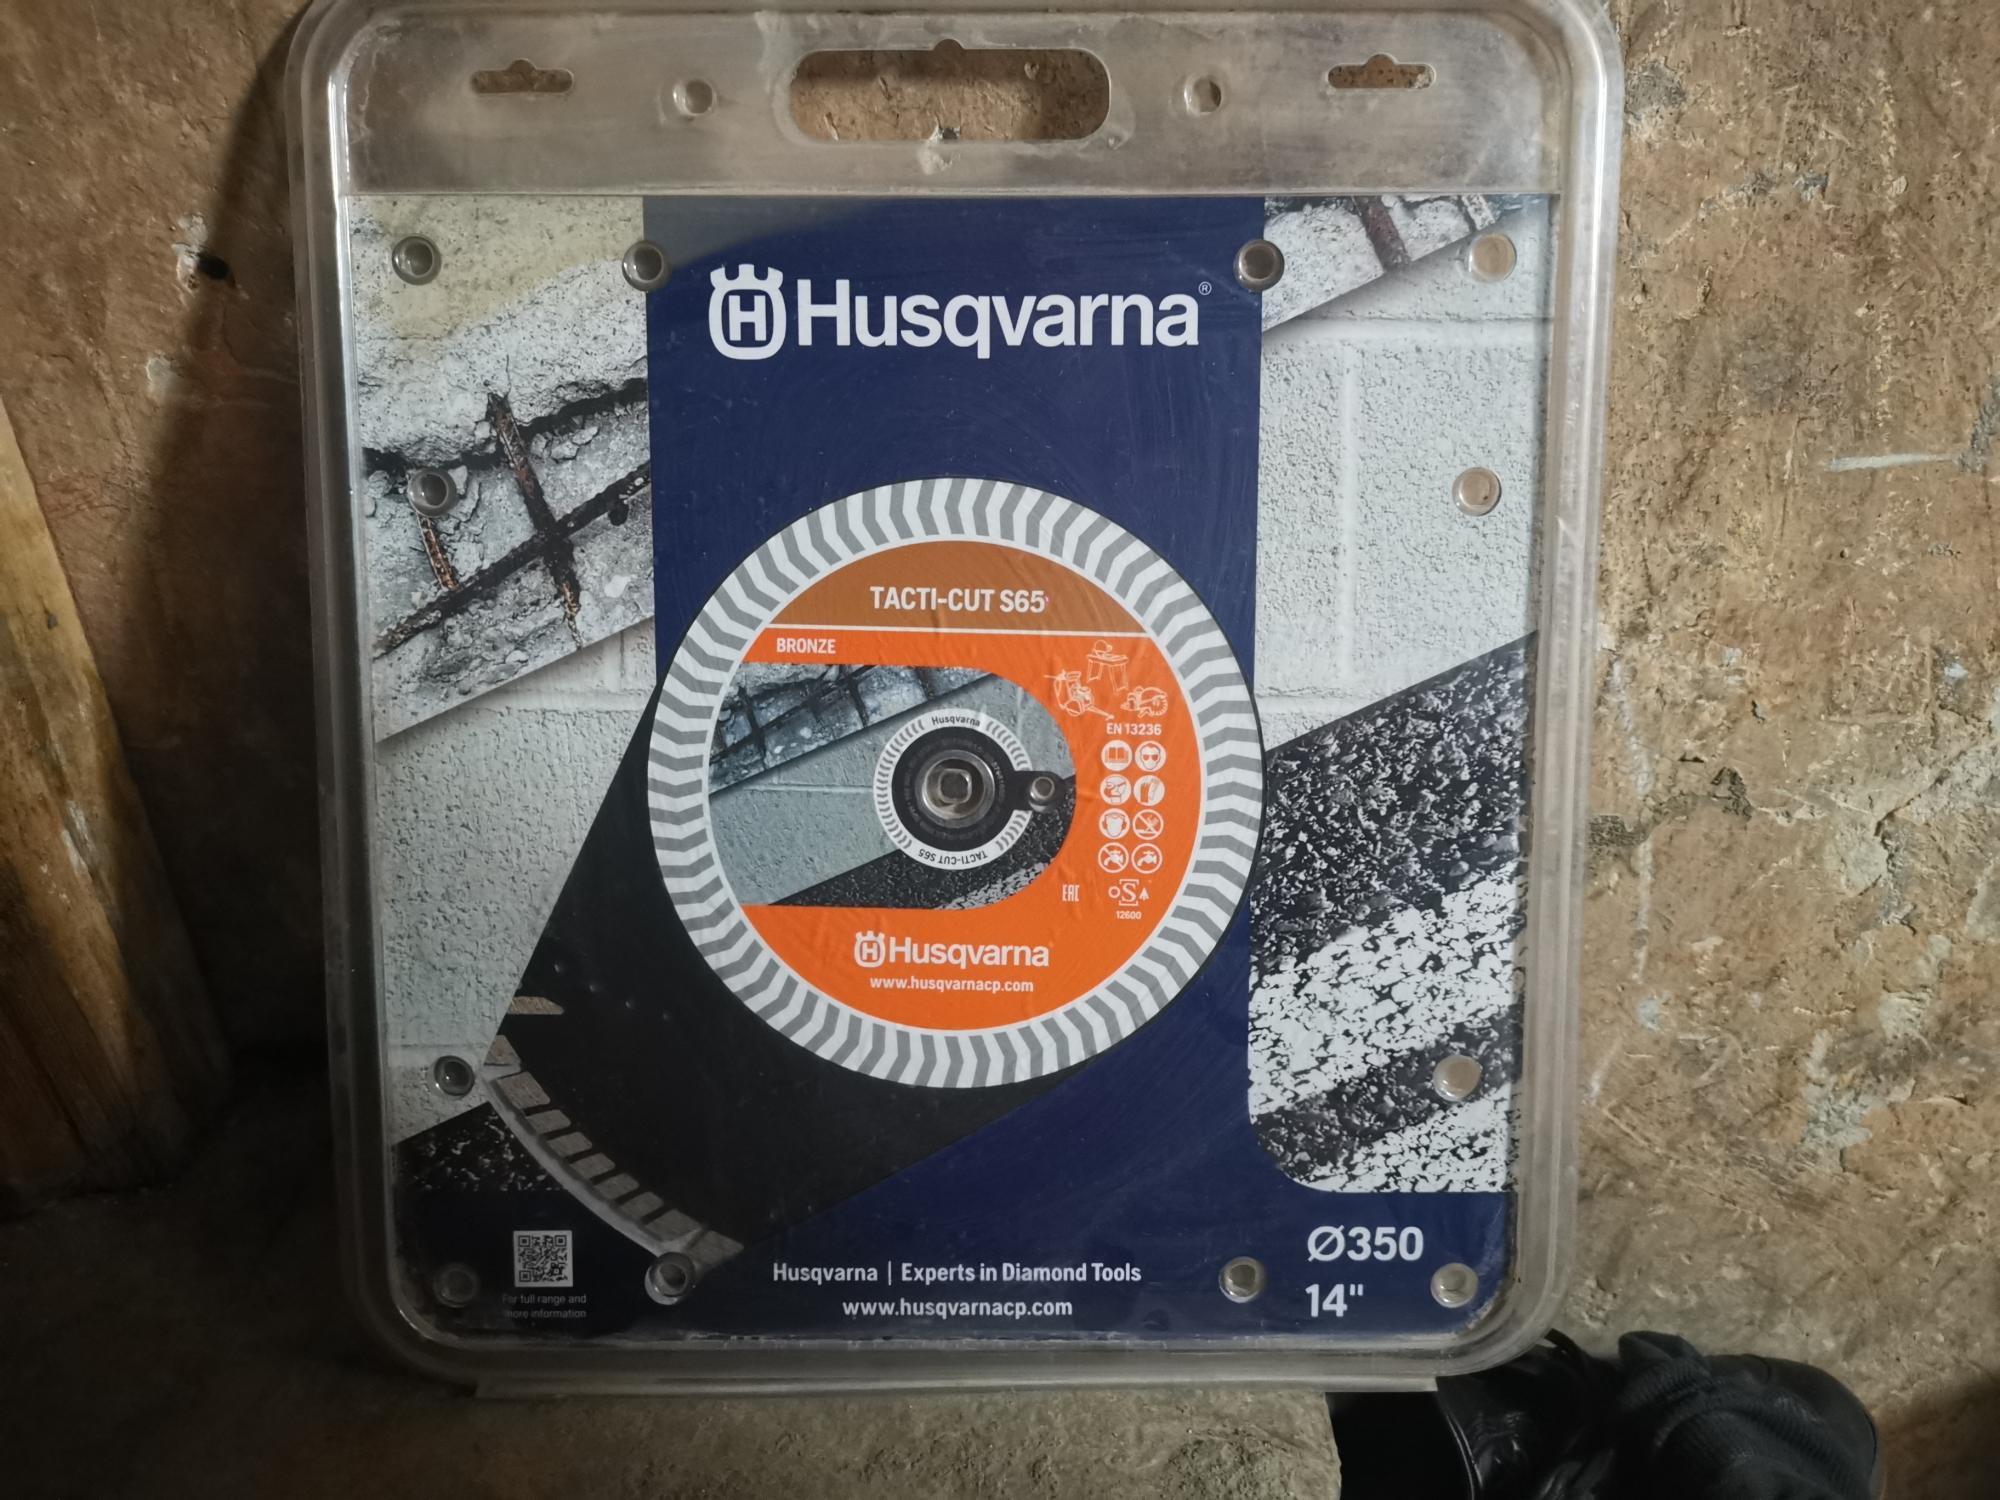 Need New Husqvarna Blades This Year. 10 Must-Know Tips Before Buying